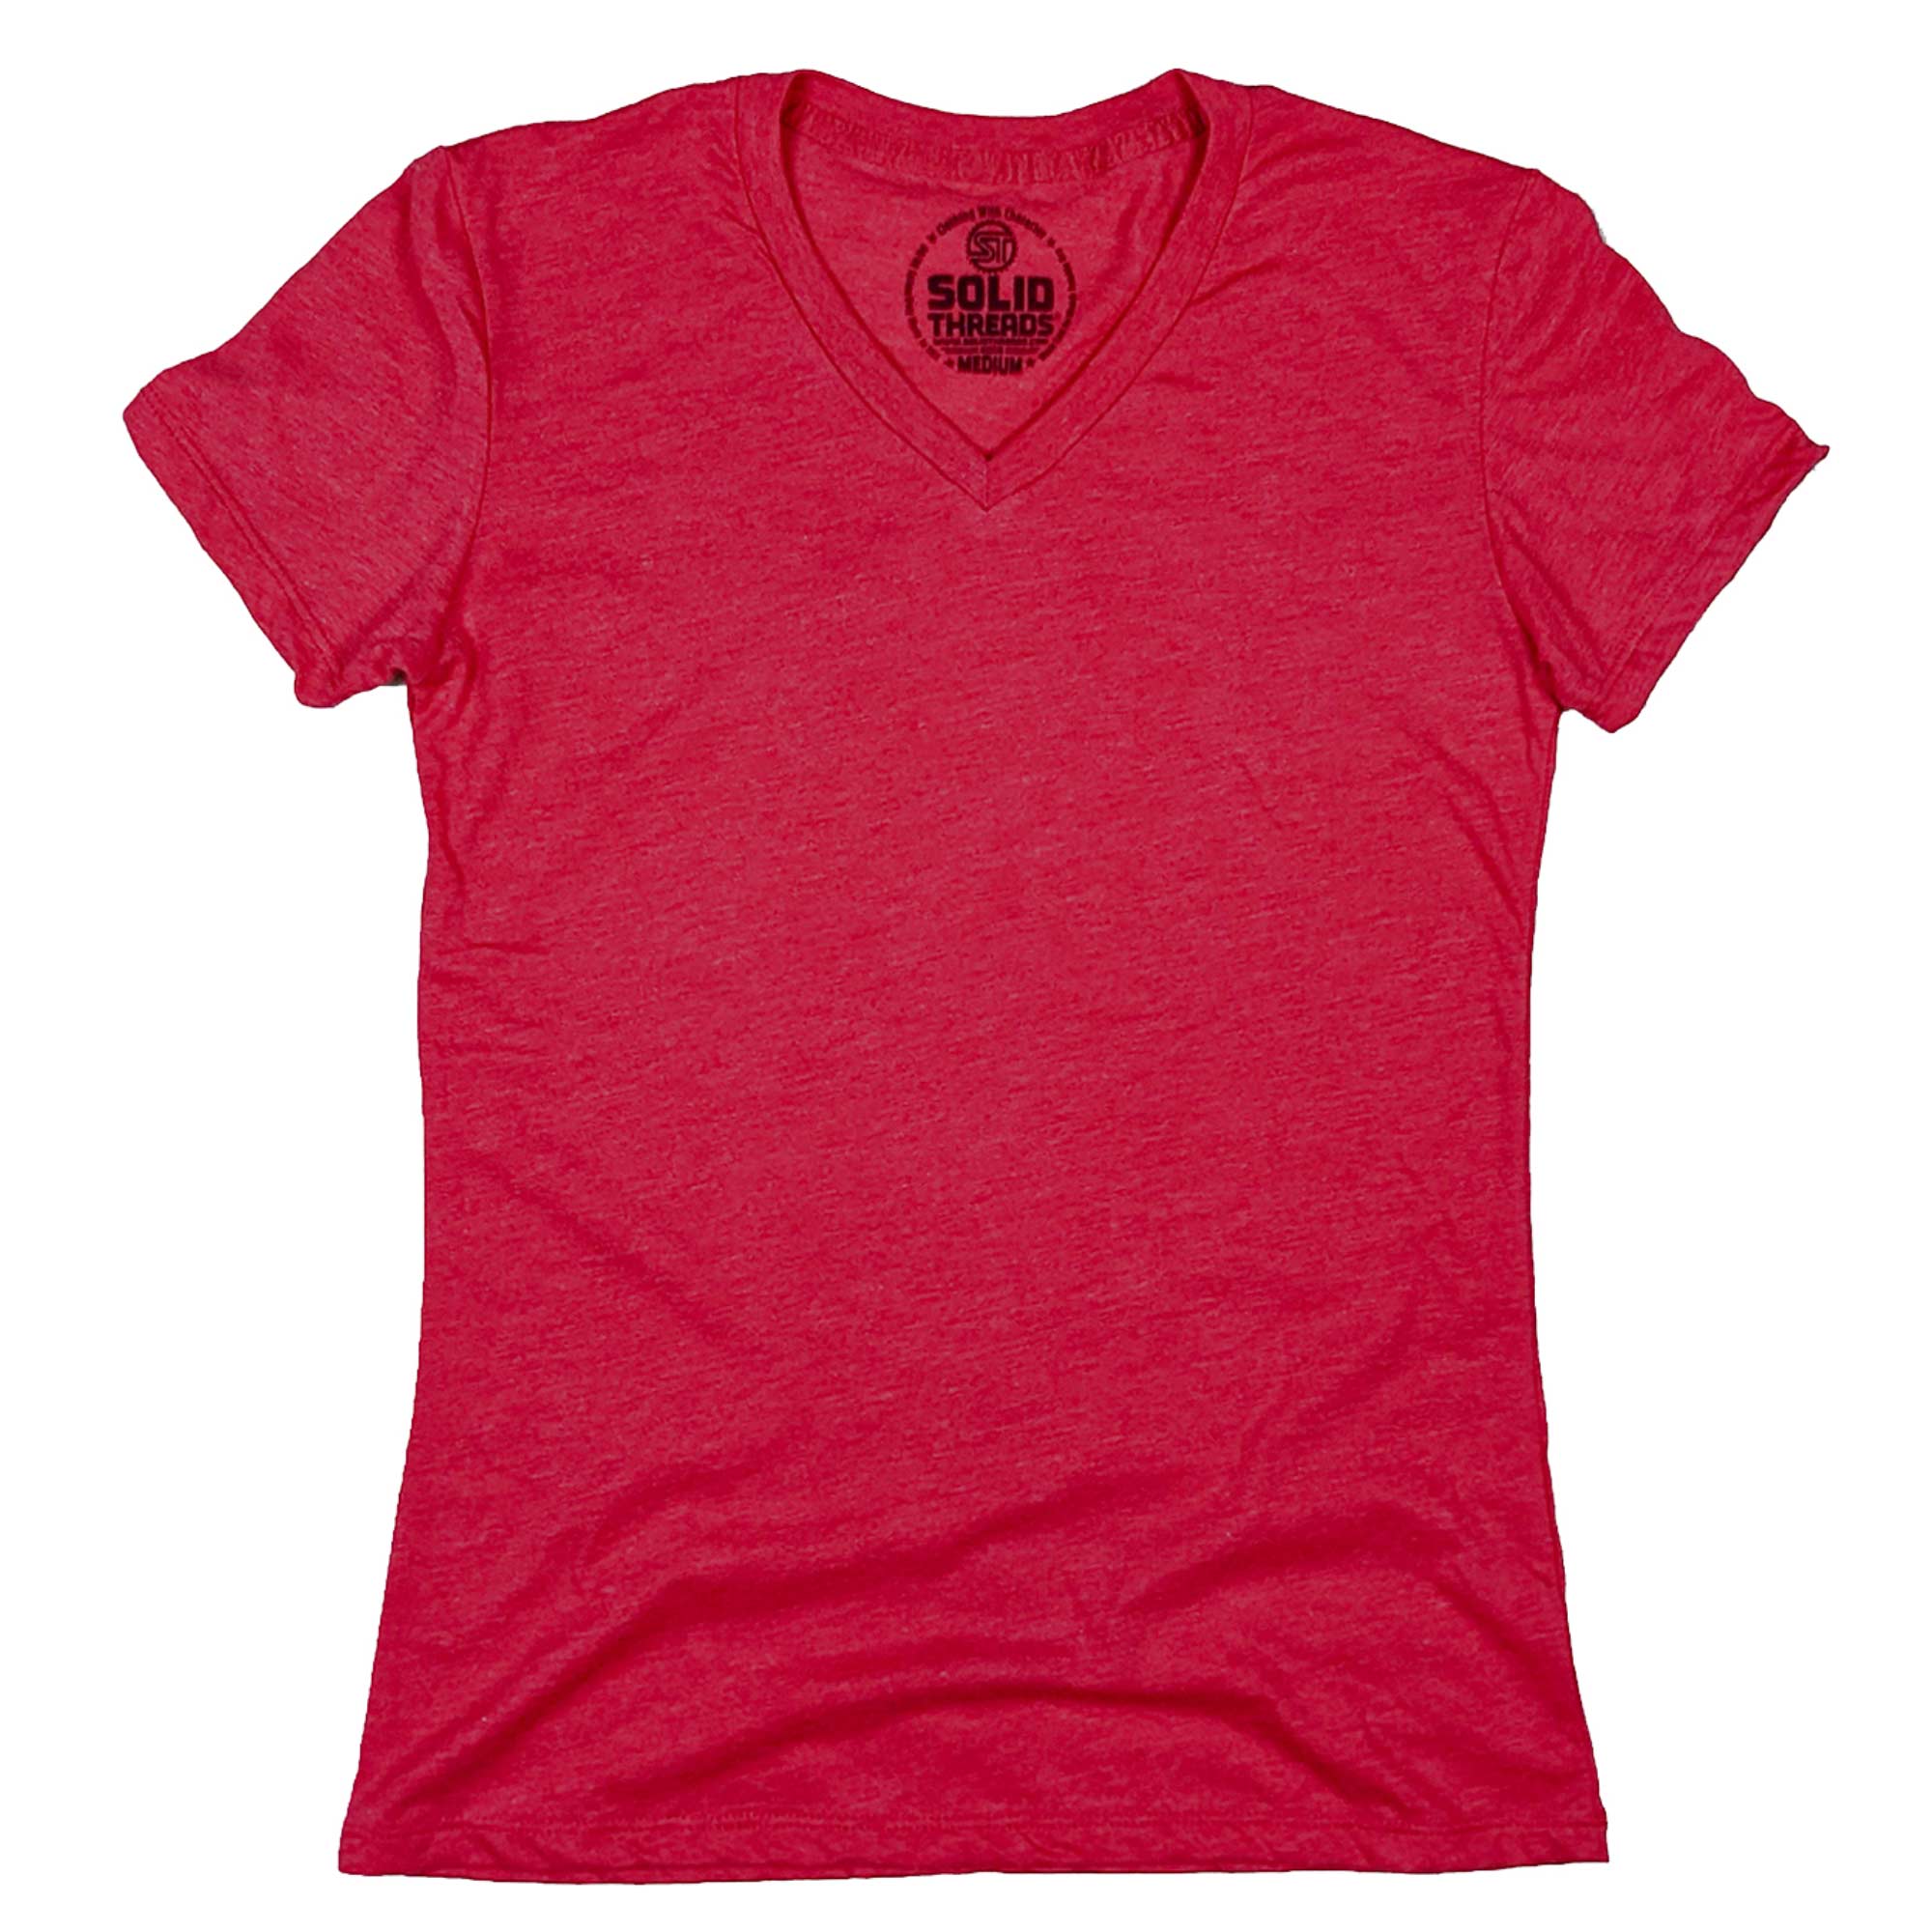 Women's Solid Threads V-Neck Red T-shirt | Vintage Inspired USA Made Tee